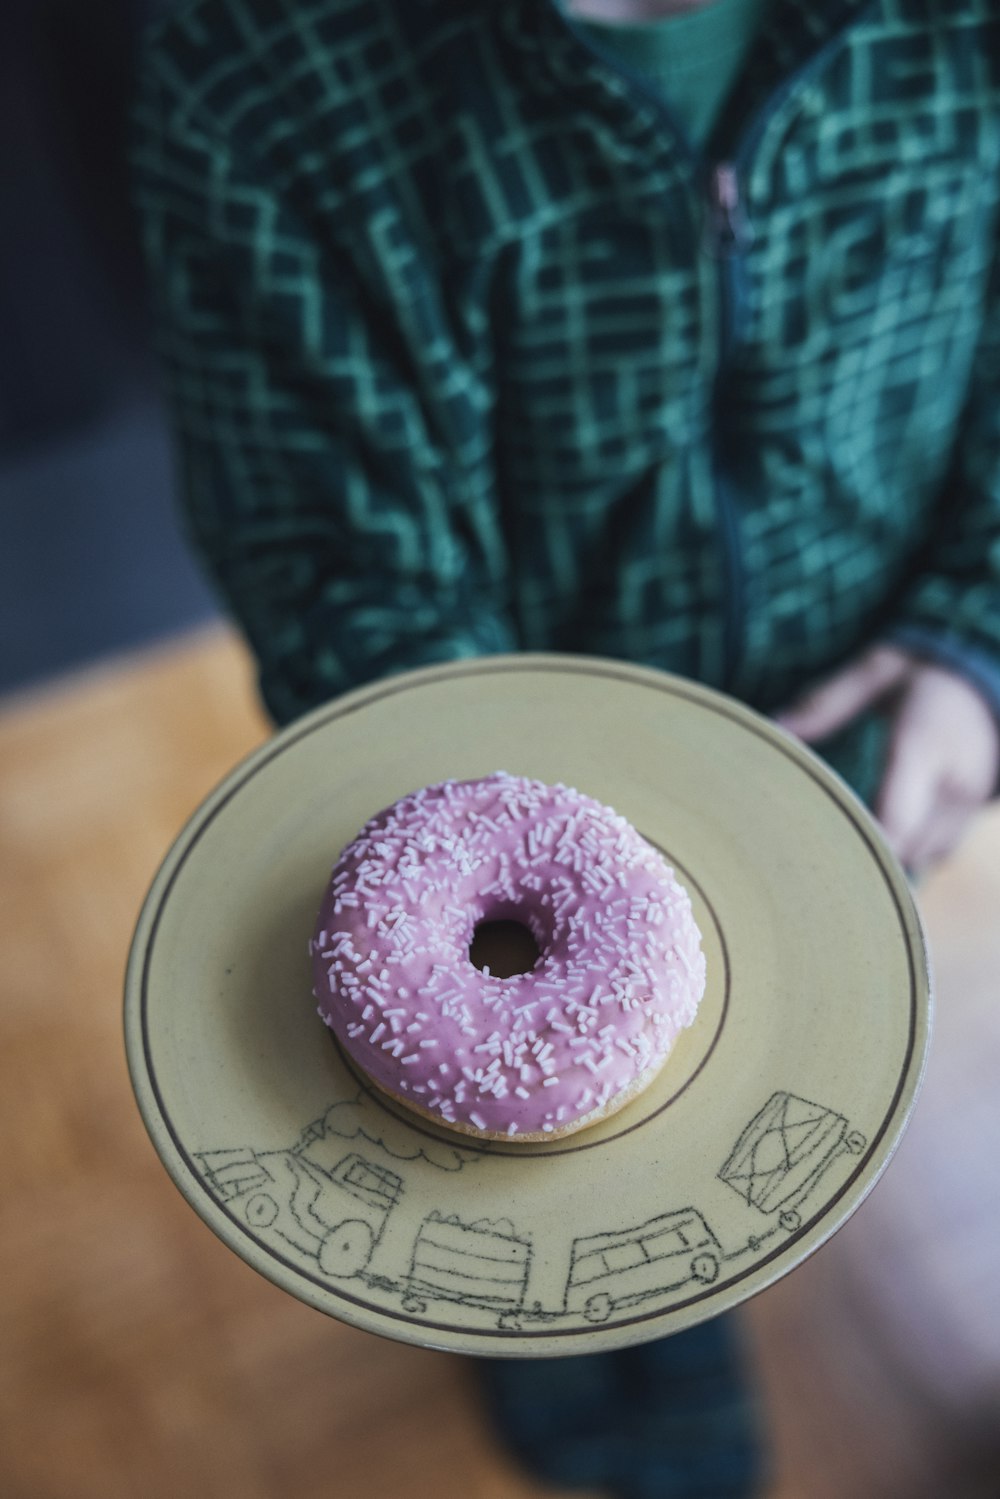 a person holding a plate with a doughnut on it